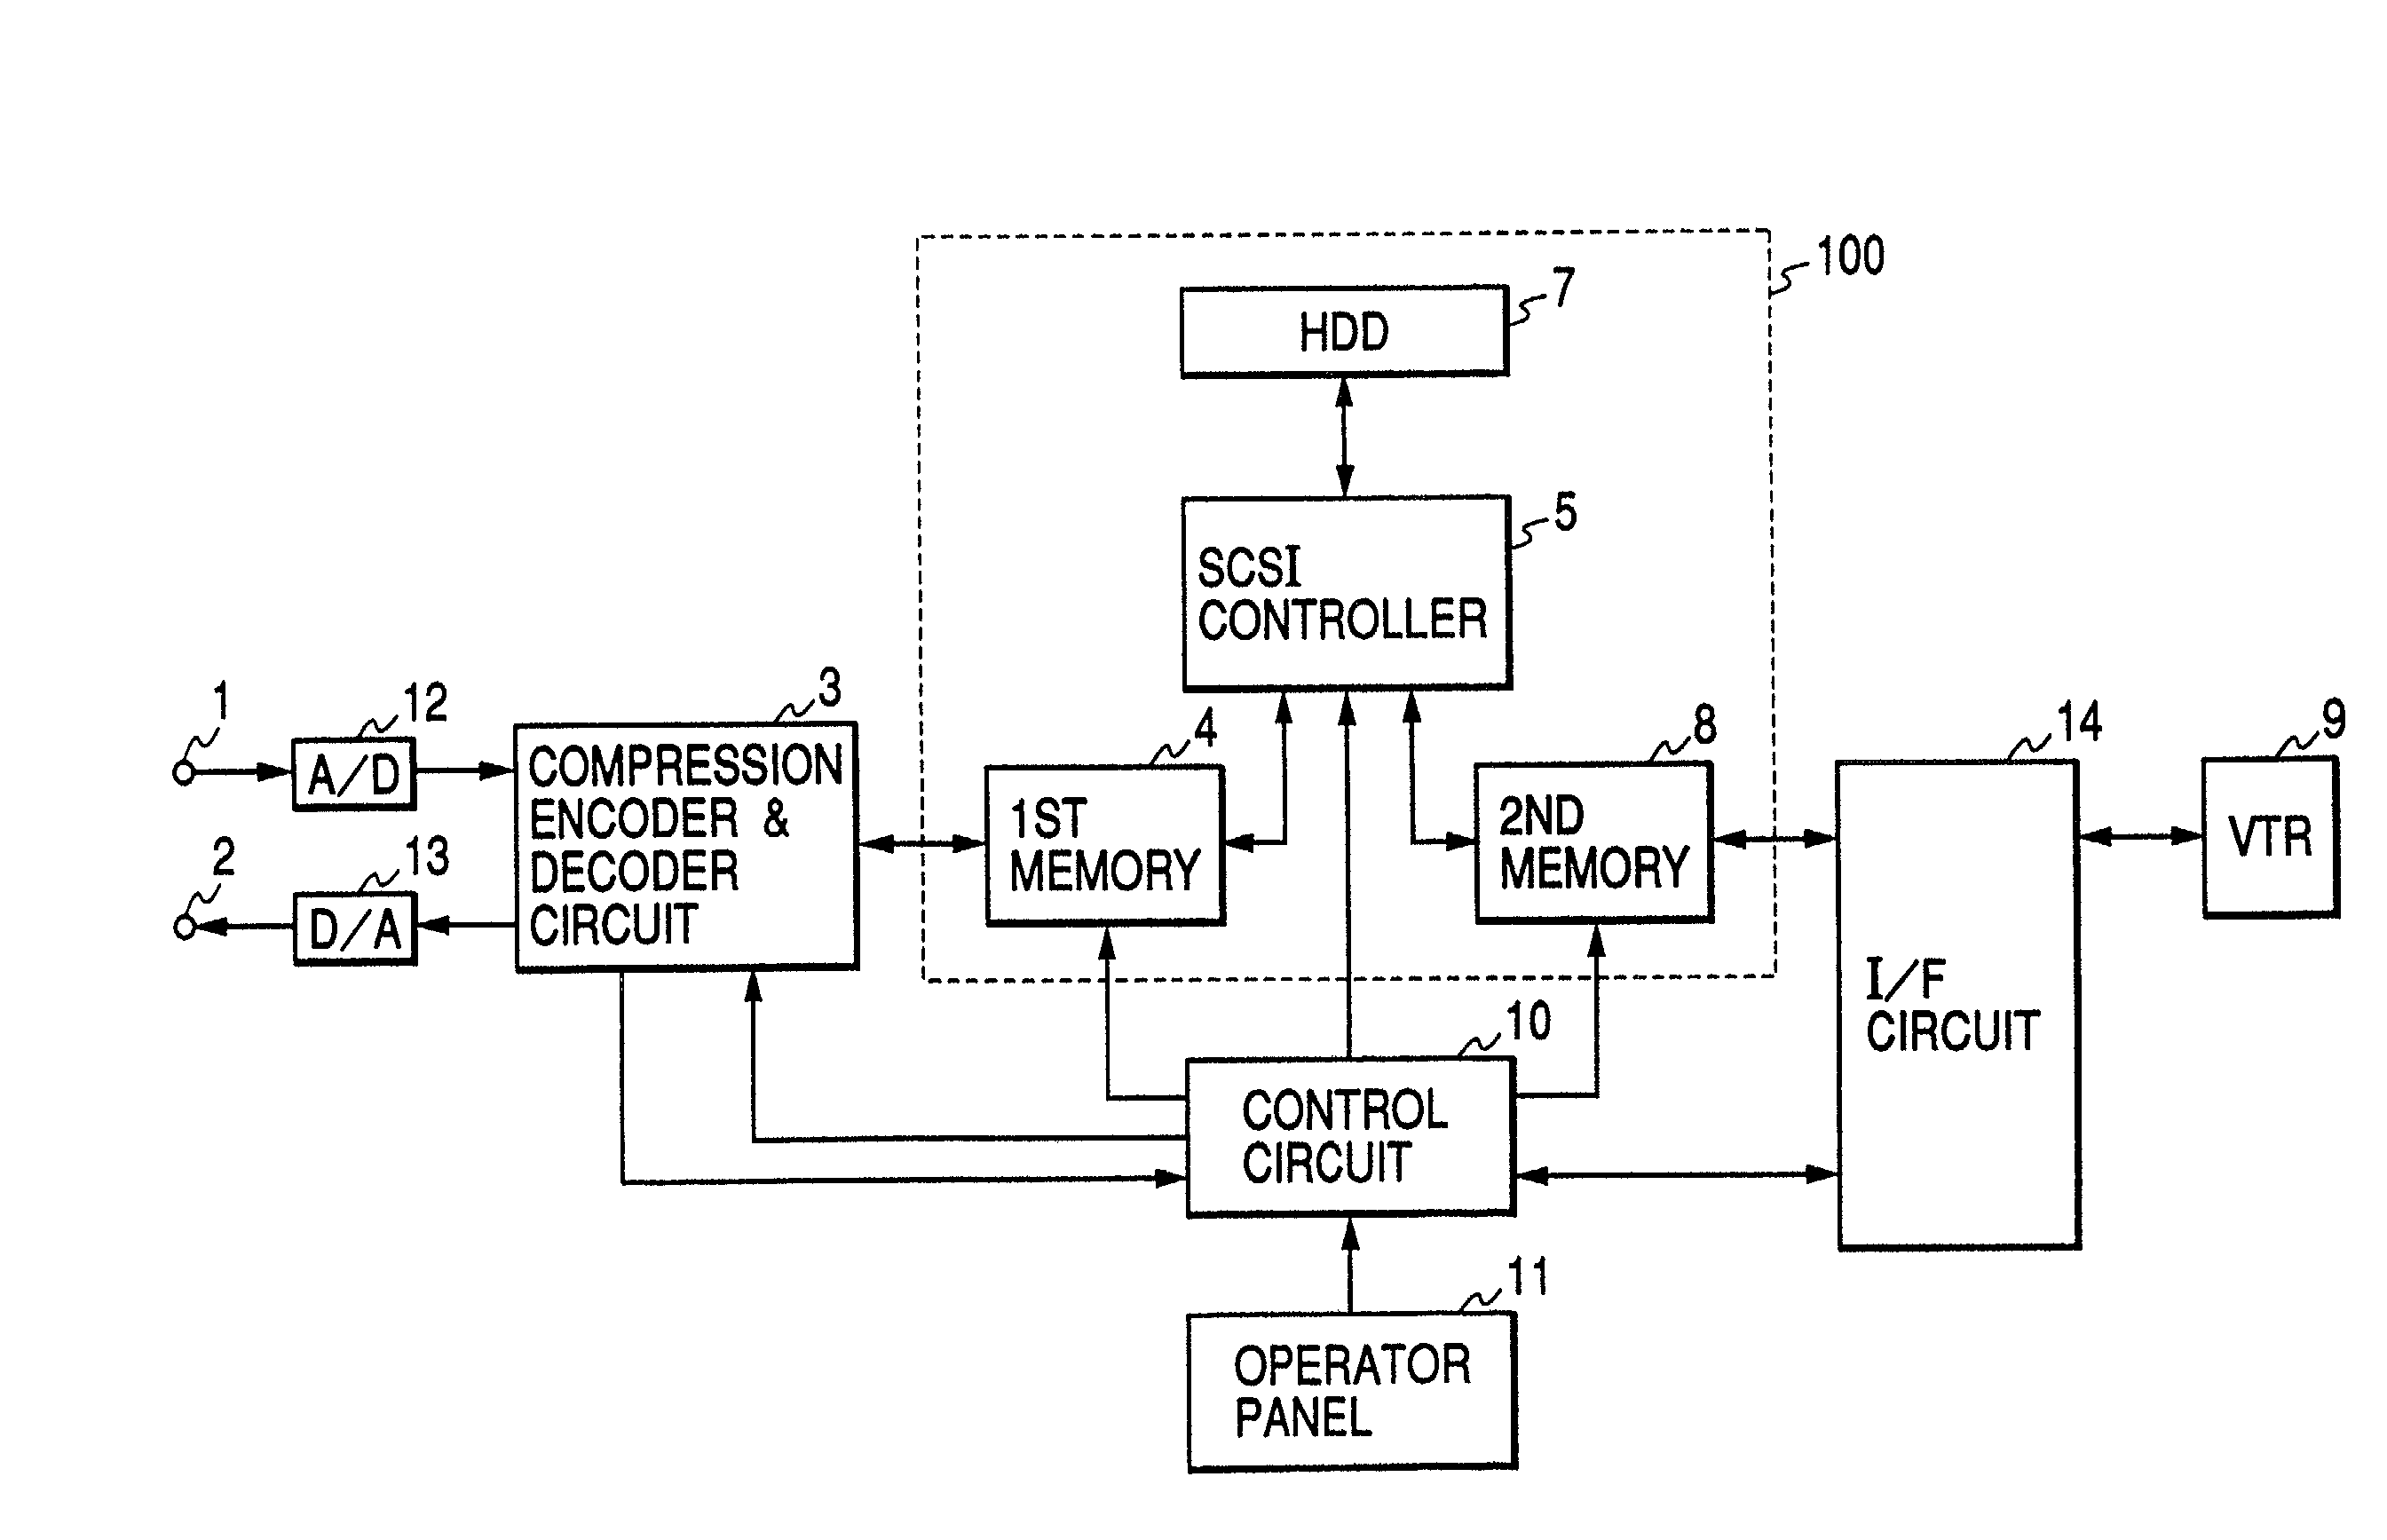 Method and apparatus for recording and playing back monitored video data